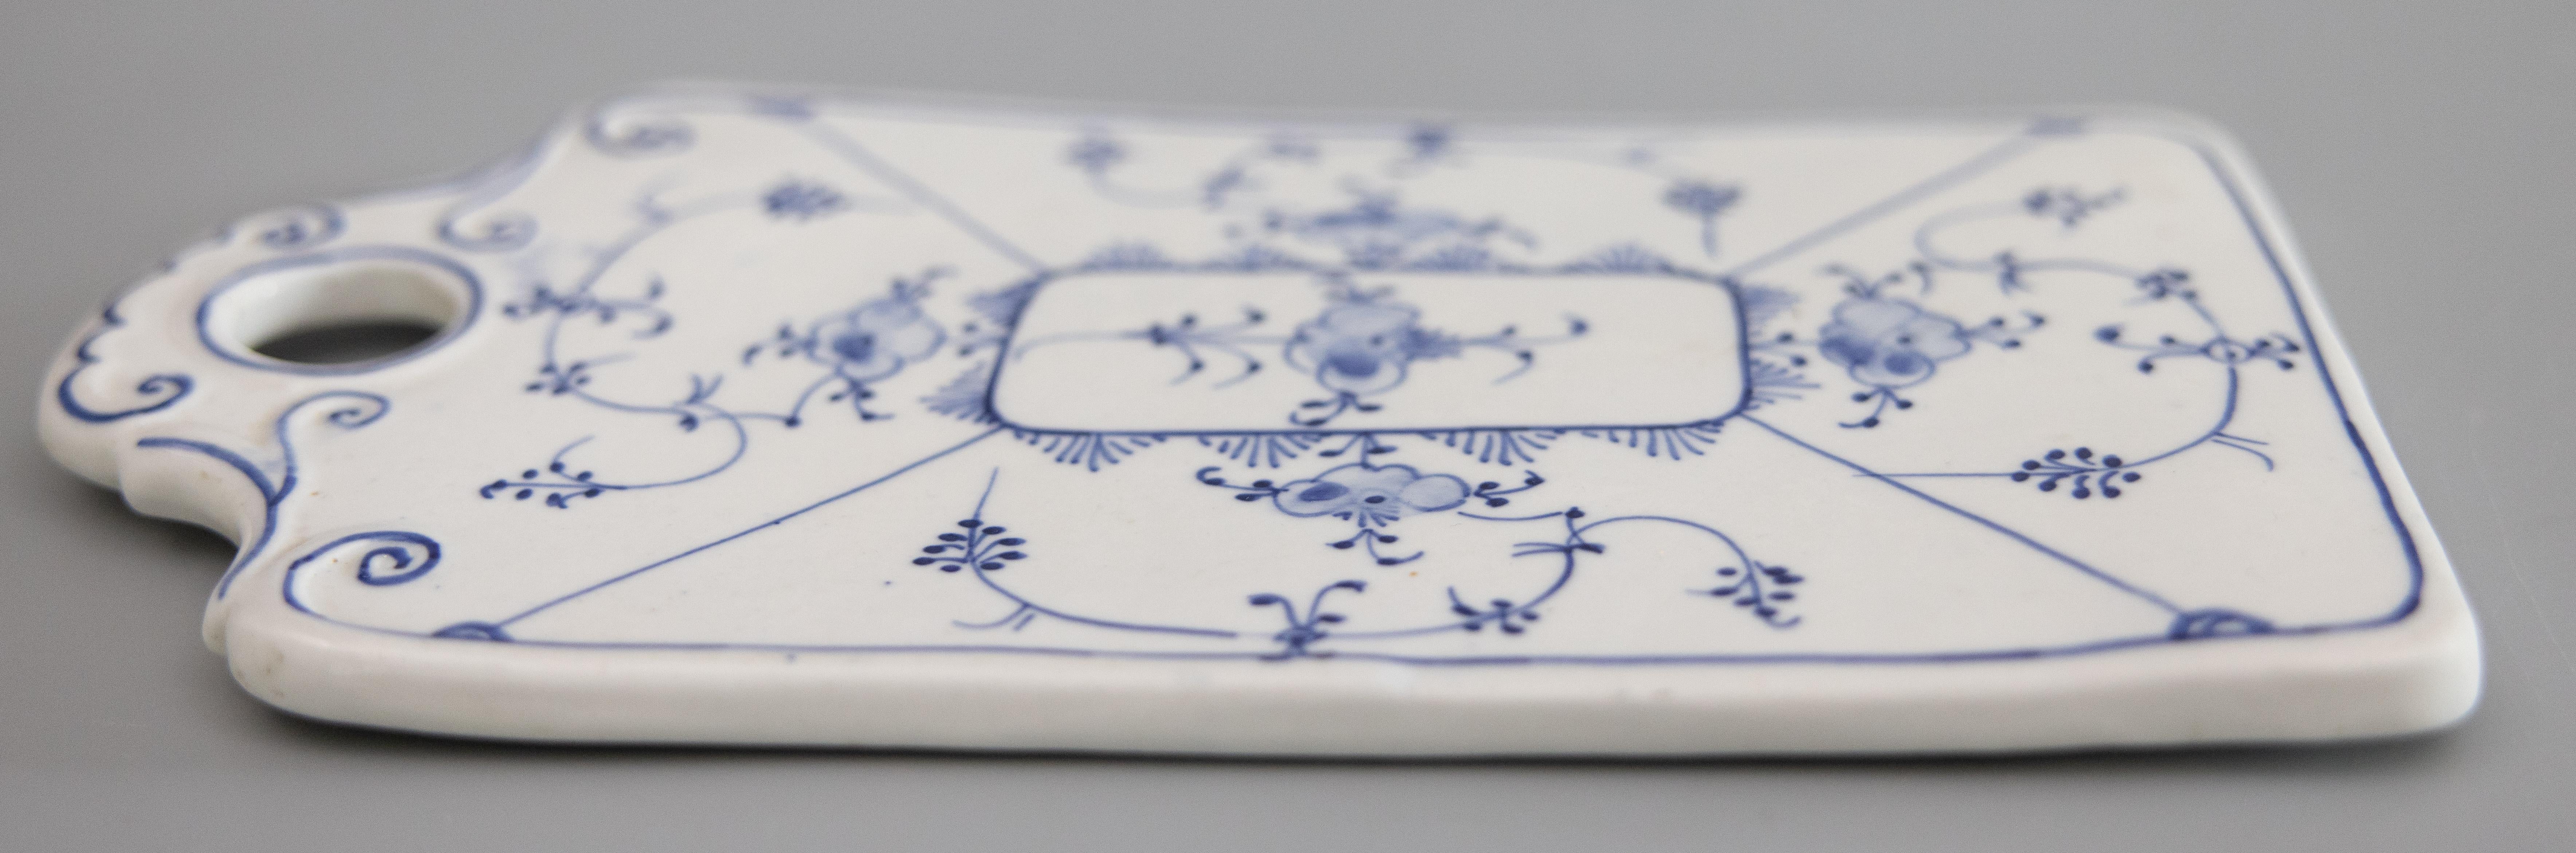 A charming antique French Country style hand painted porcelain blue and white floral cheese charcuterie or butter board. This lovely cutting board would be perfect displayed in a kitchen, breakfast room, or hung on a wall.

DIMENSIONS
10ʺW × 0.25ʺD